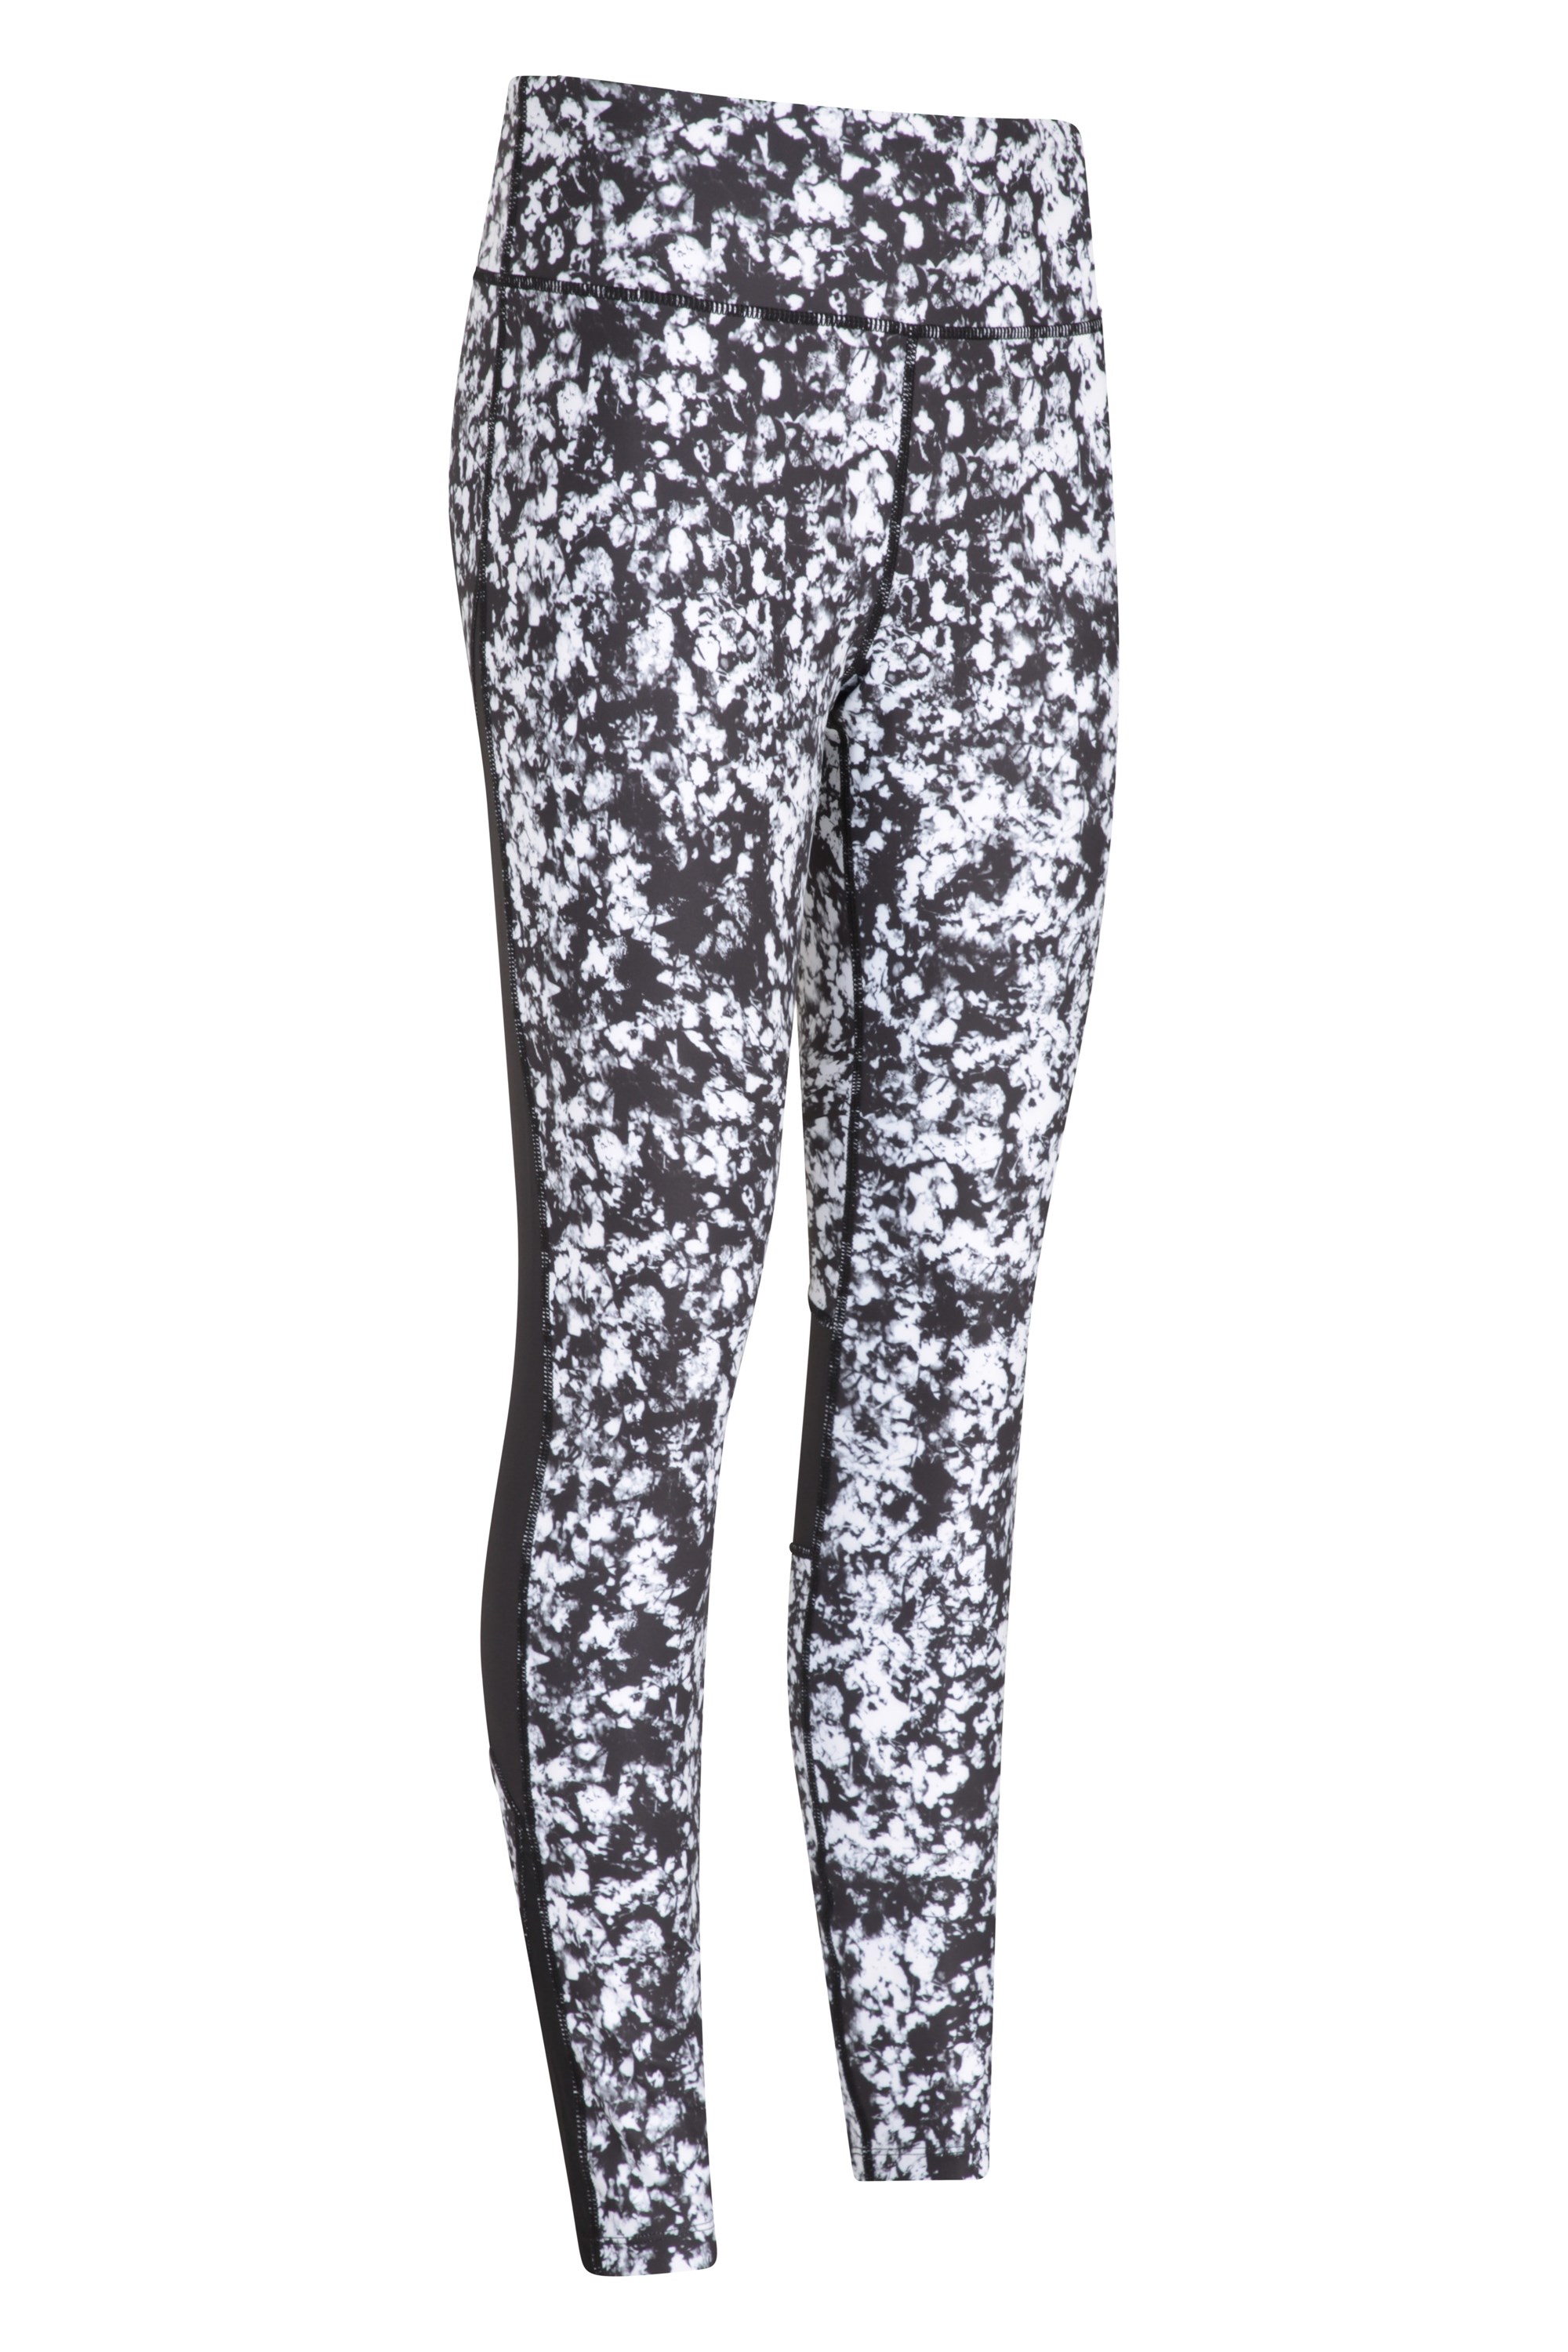 036473 TRACK RECORD PATTERNED WOMENS LEGGING